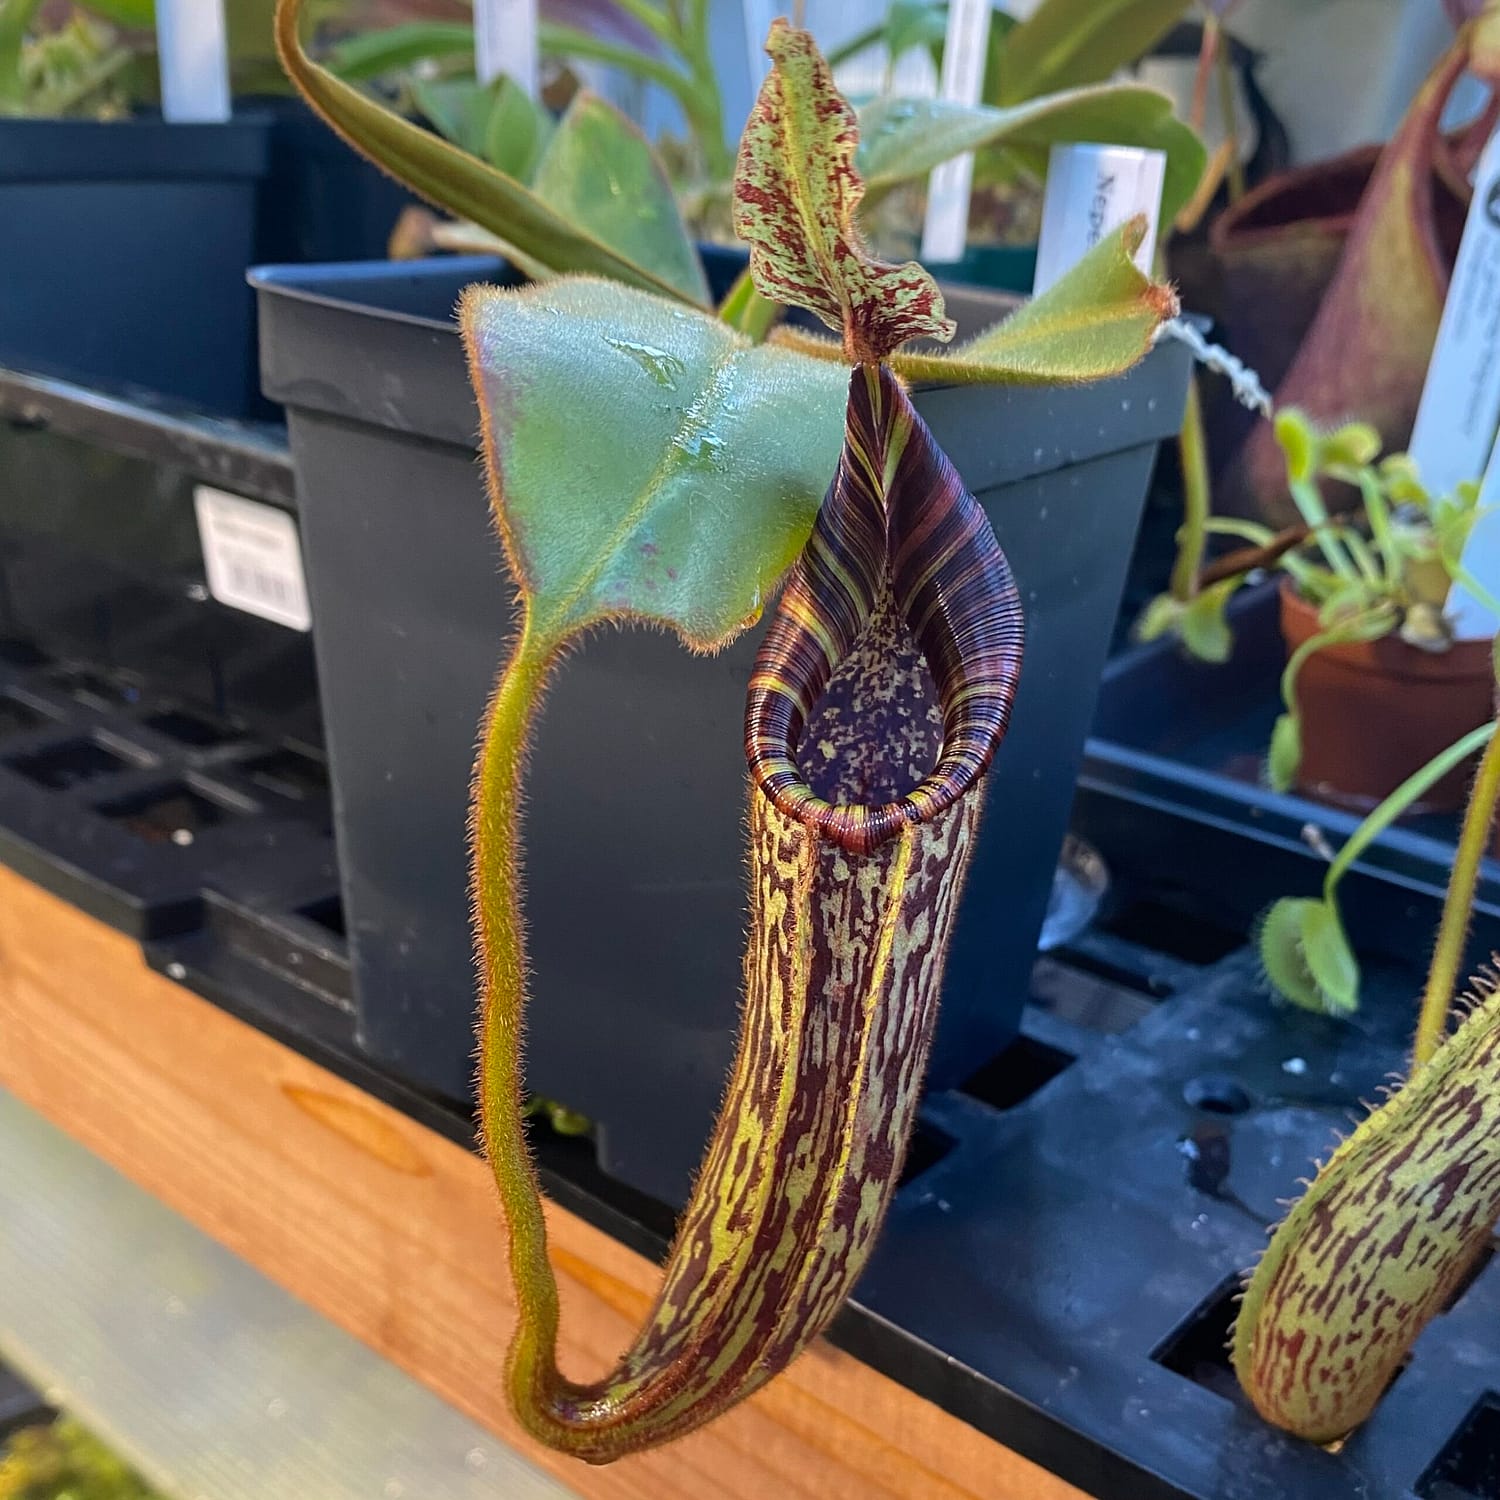 A Nepenthes platychila x mollis plant in a black container